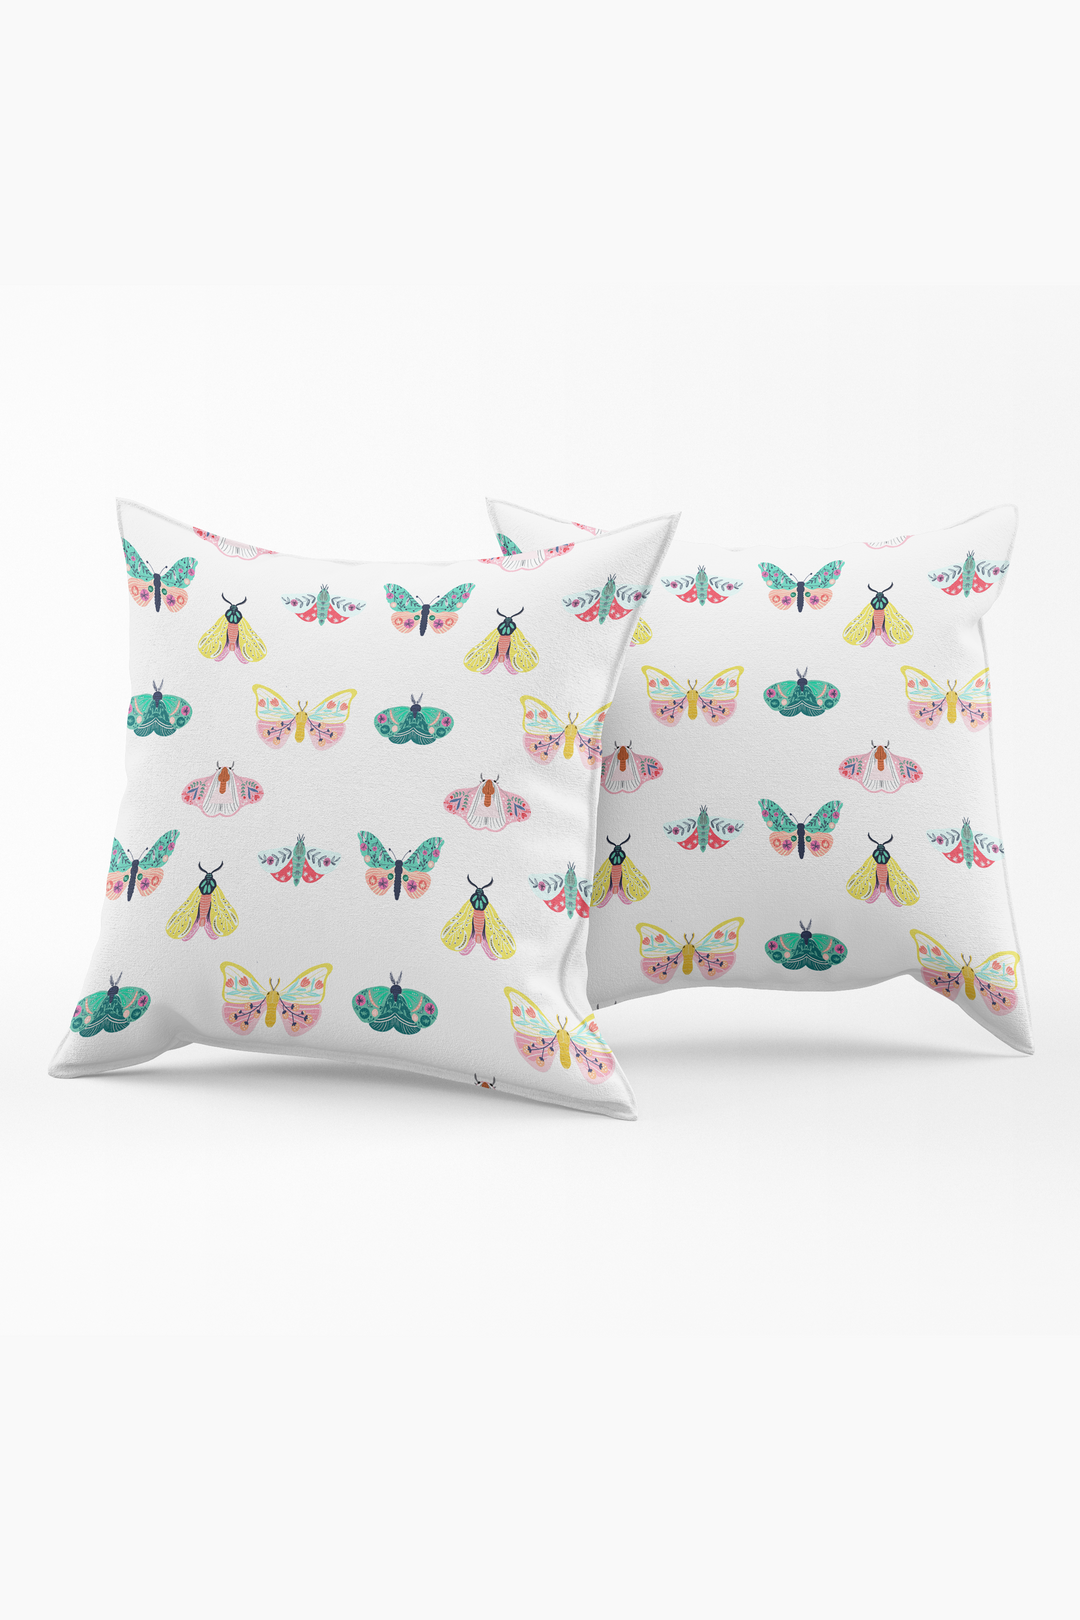 Set of 2 Butterfly Charm Cushion Covers